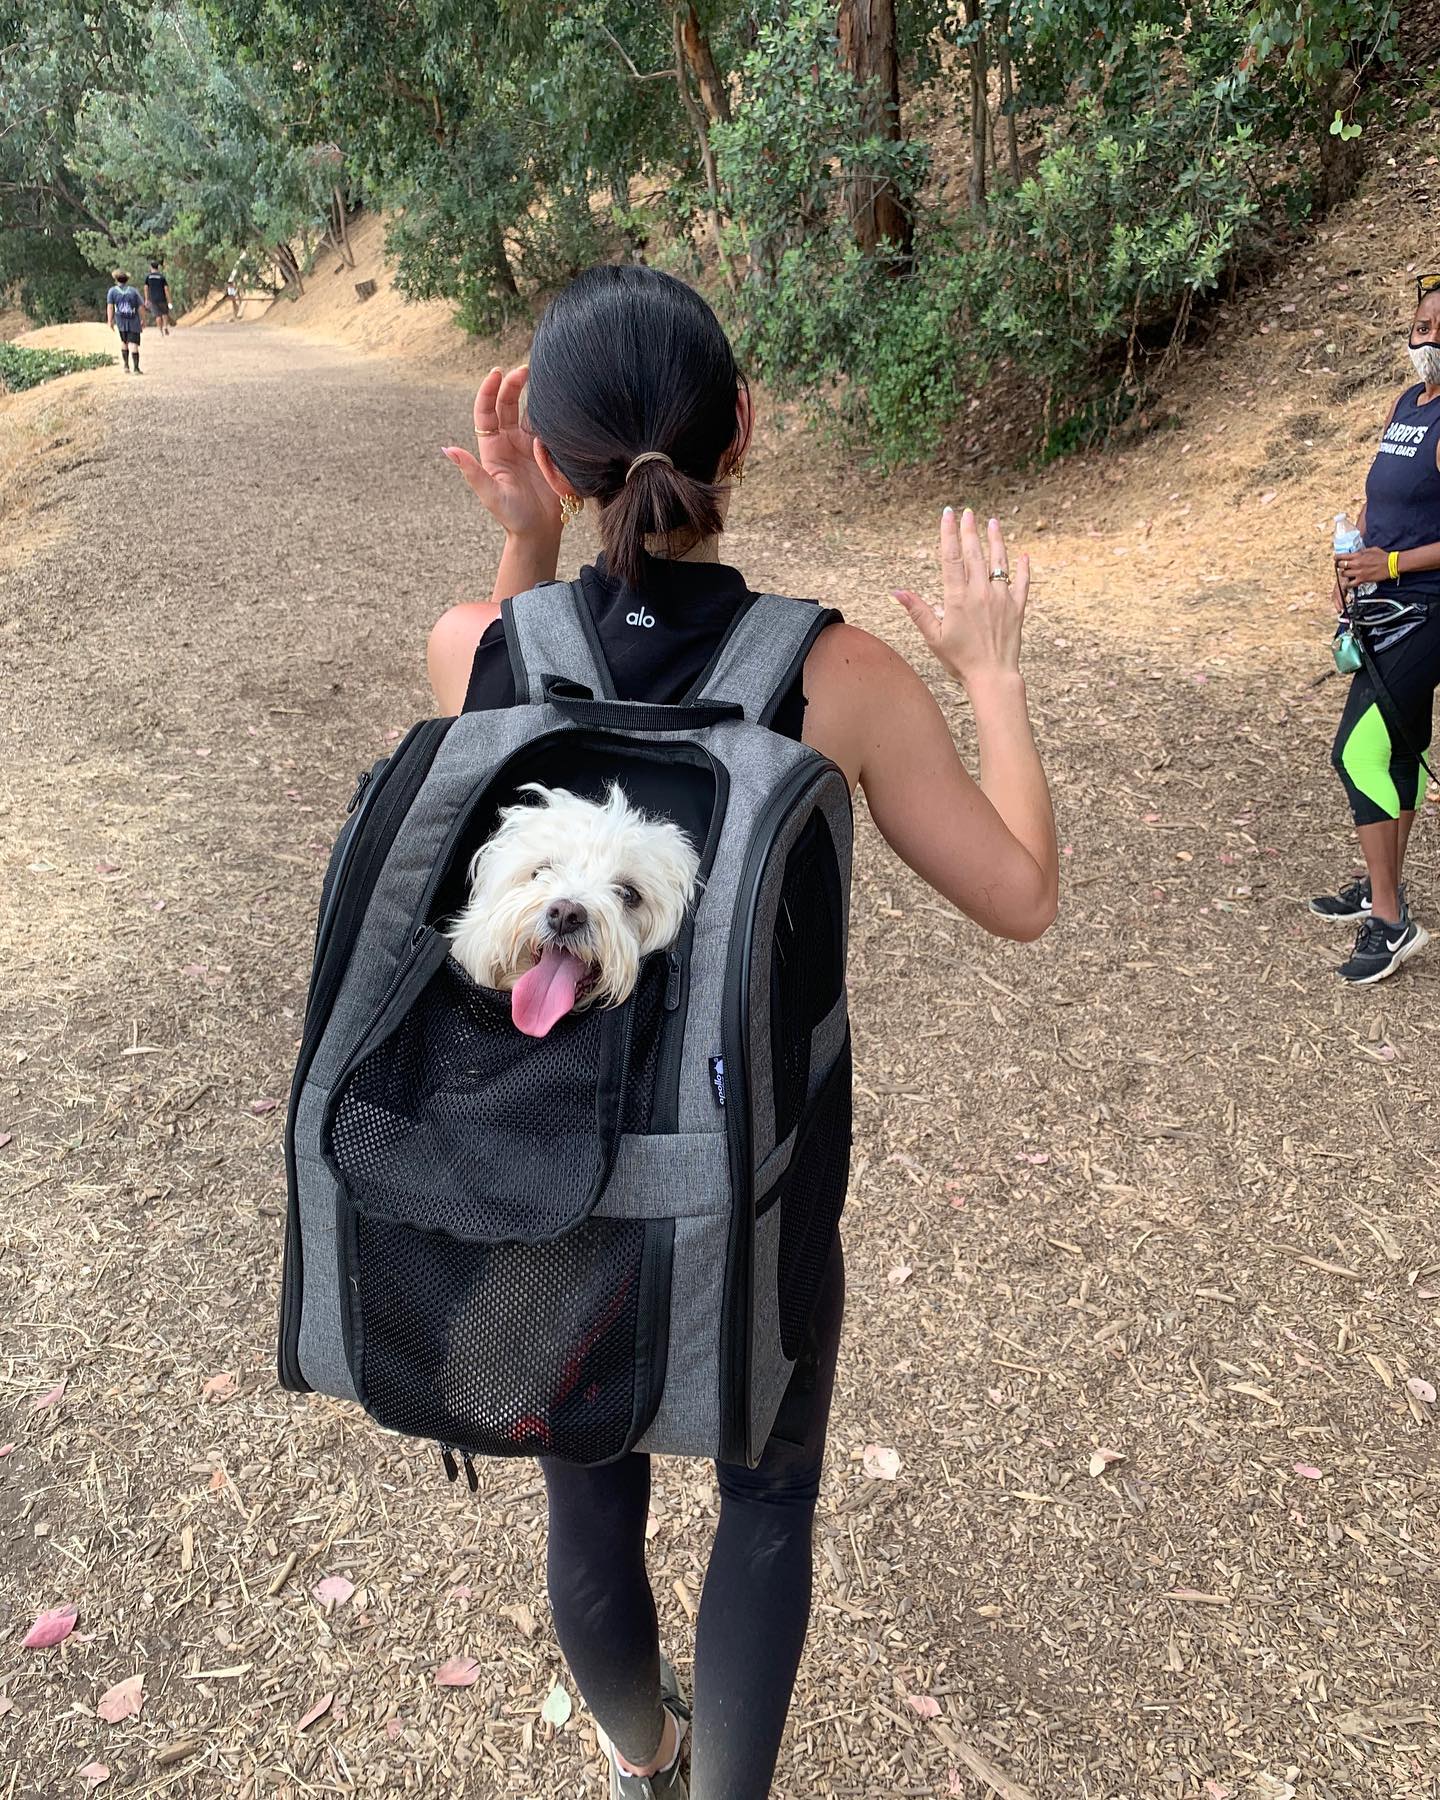 Photos n°2 : Lucy Hale Puts her Pup on Her Back!